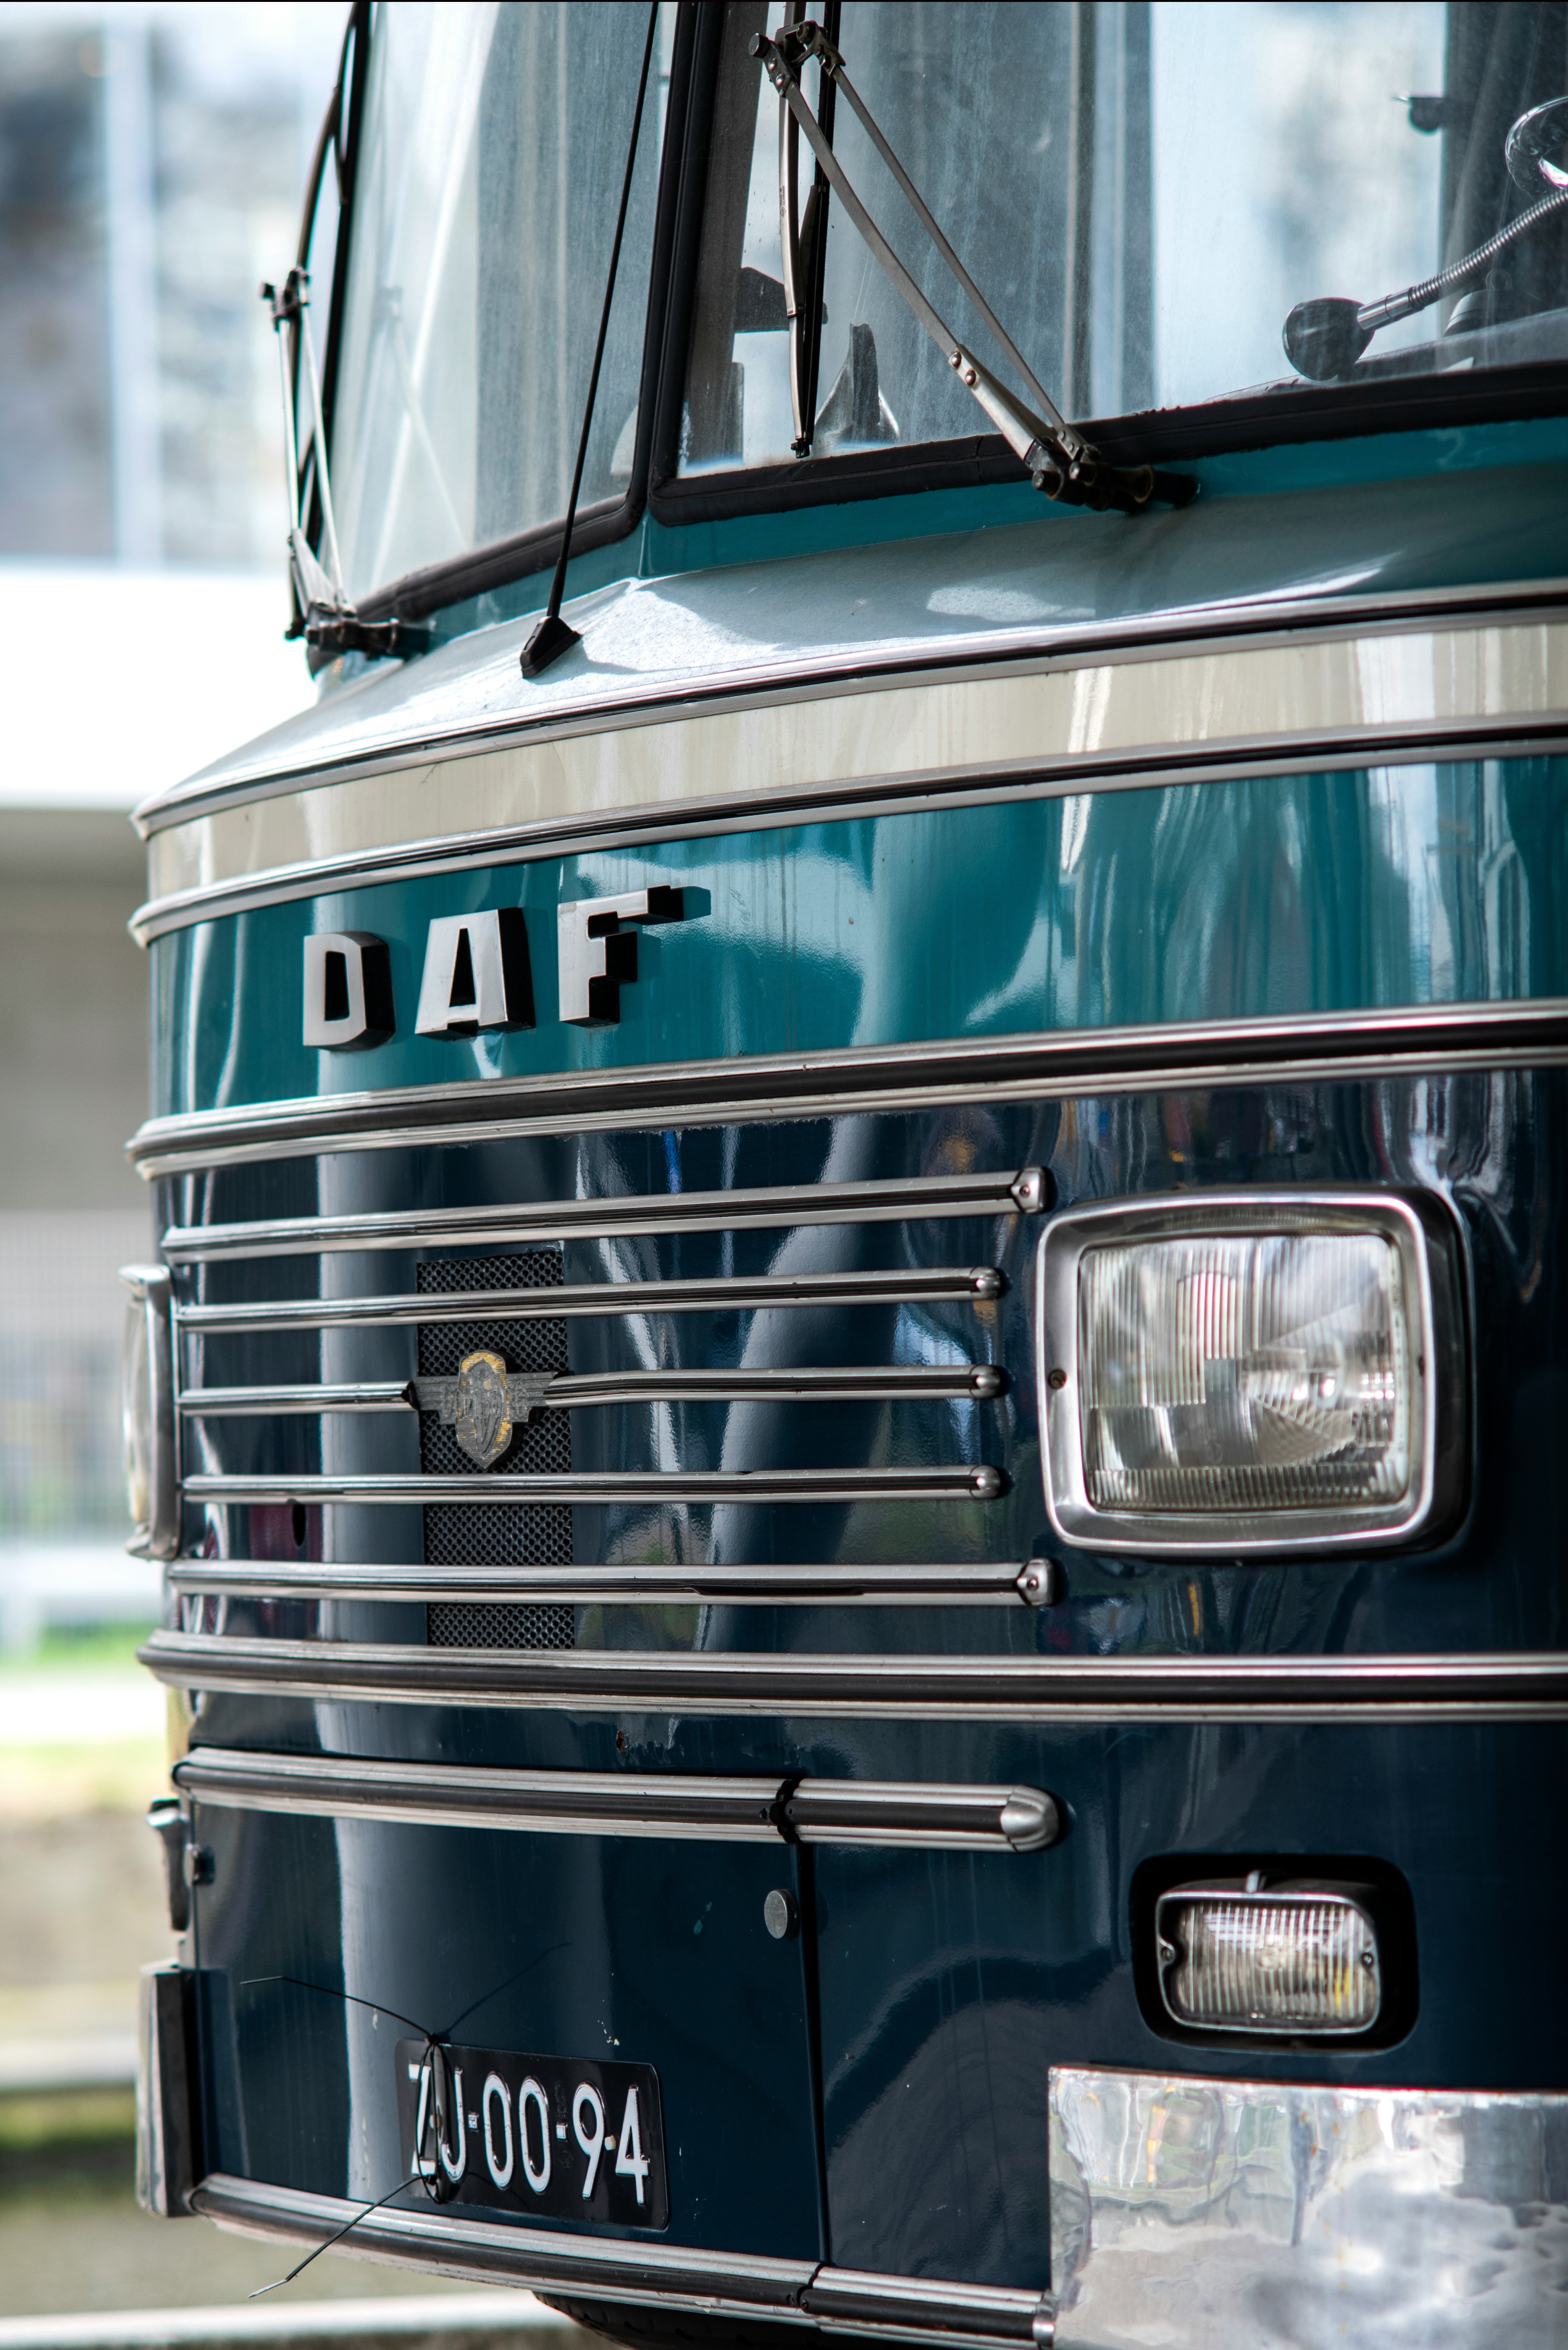 Blue bus with "DAF" on the grill - image by Lucas Van Oort - Unsplash